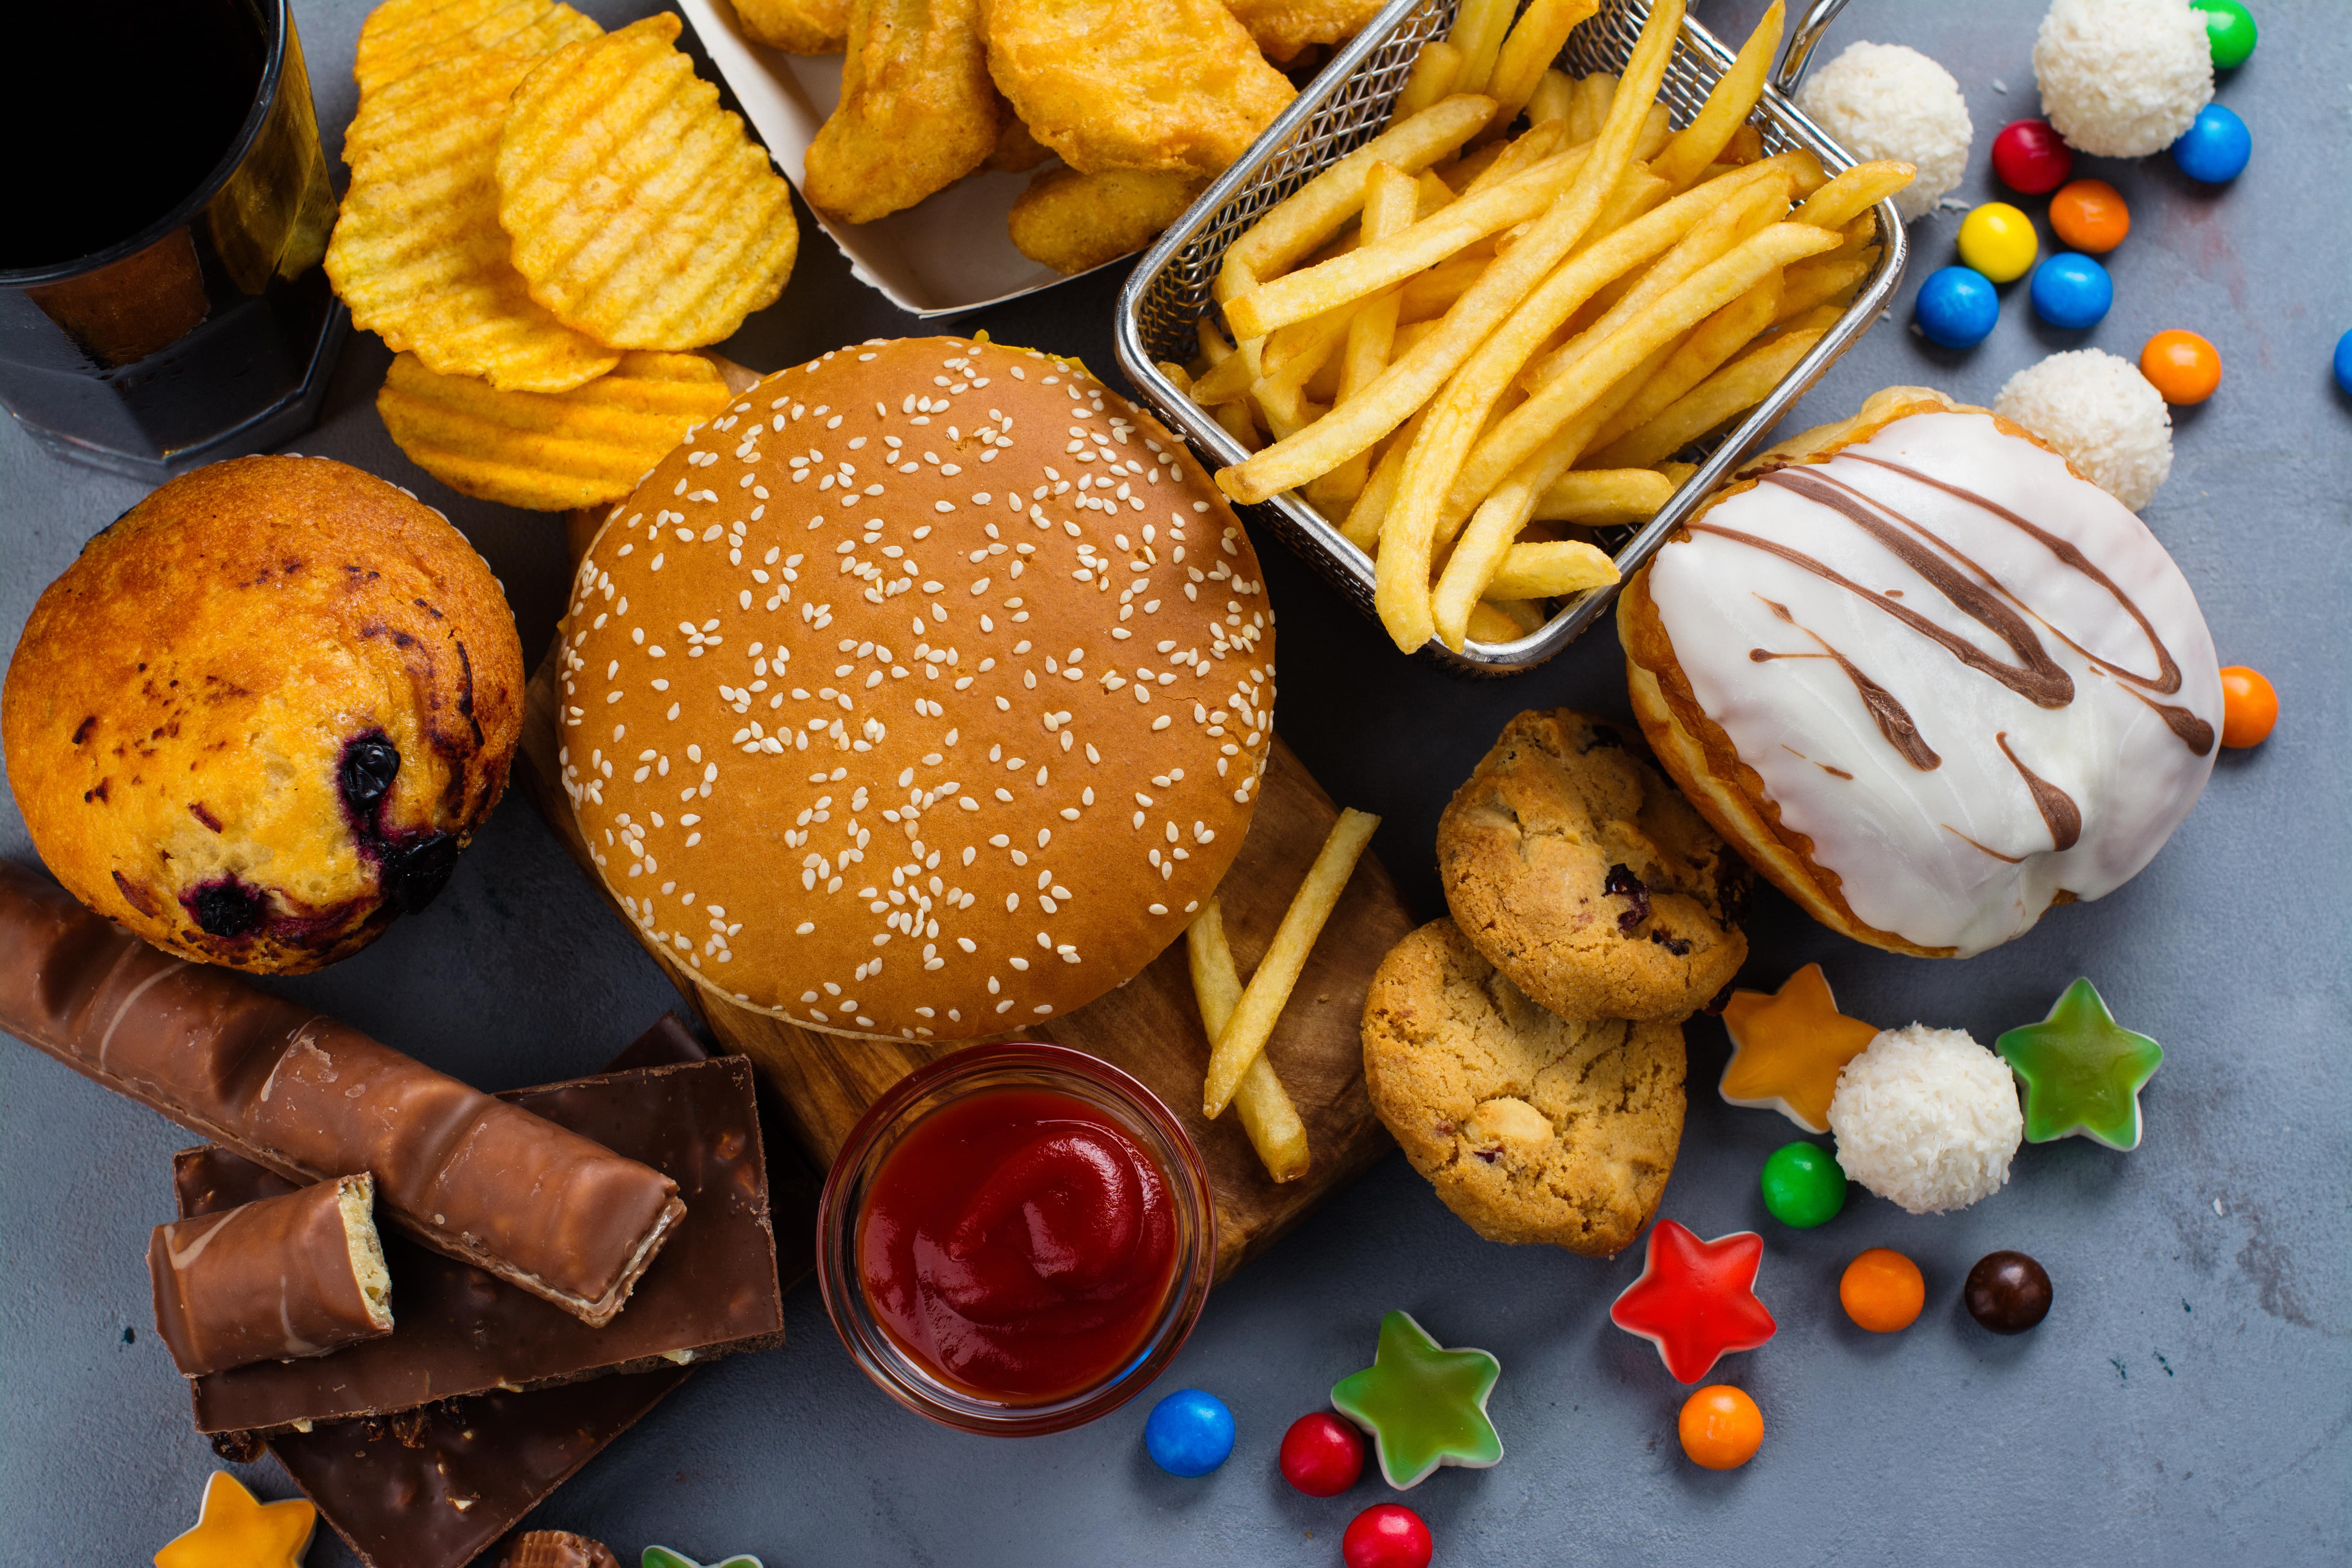 In Honor of National Junk Food Day: Popular Junk Foods Around the World